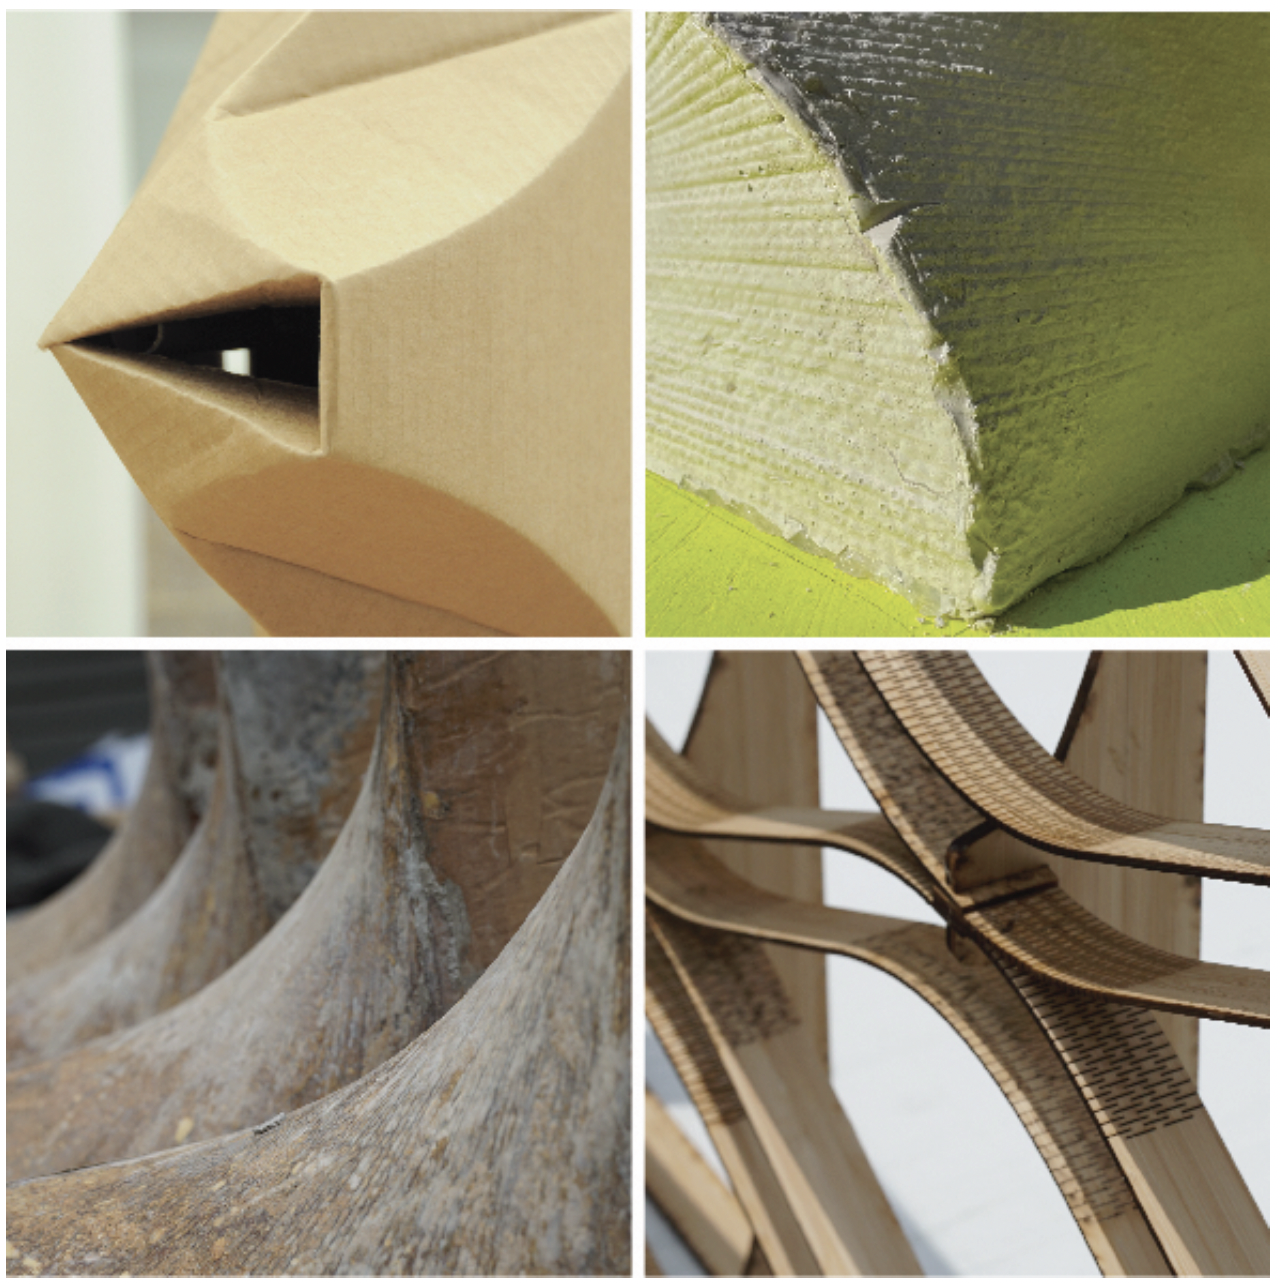 Different materials included in the research: Crease folded cardboard, plaster, laminated cardboard, bamboo